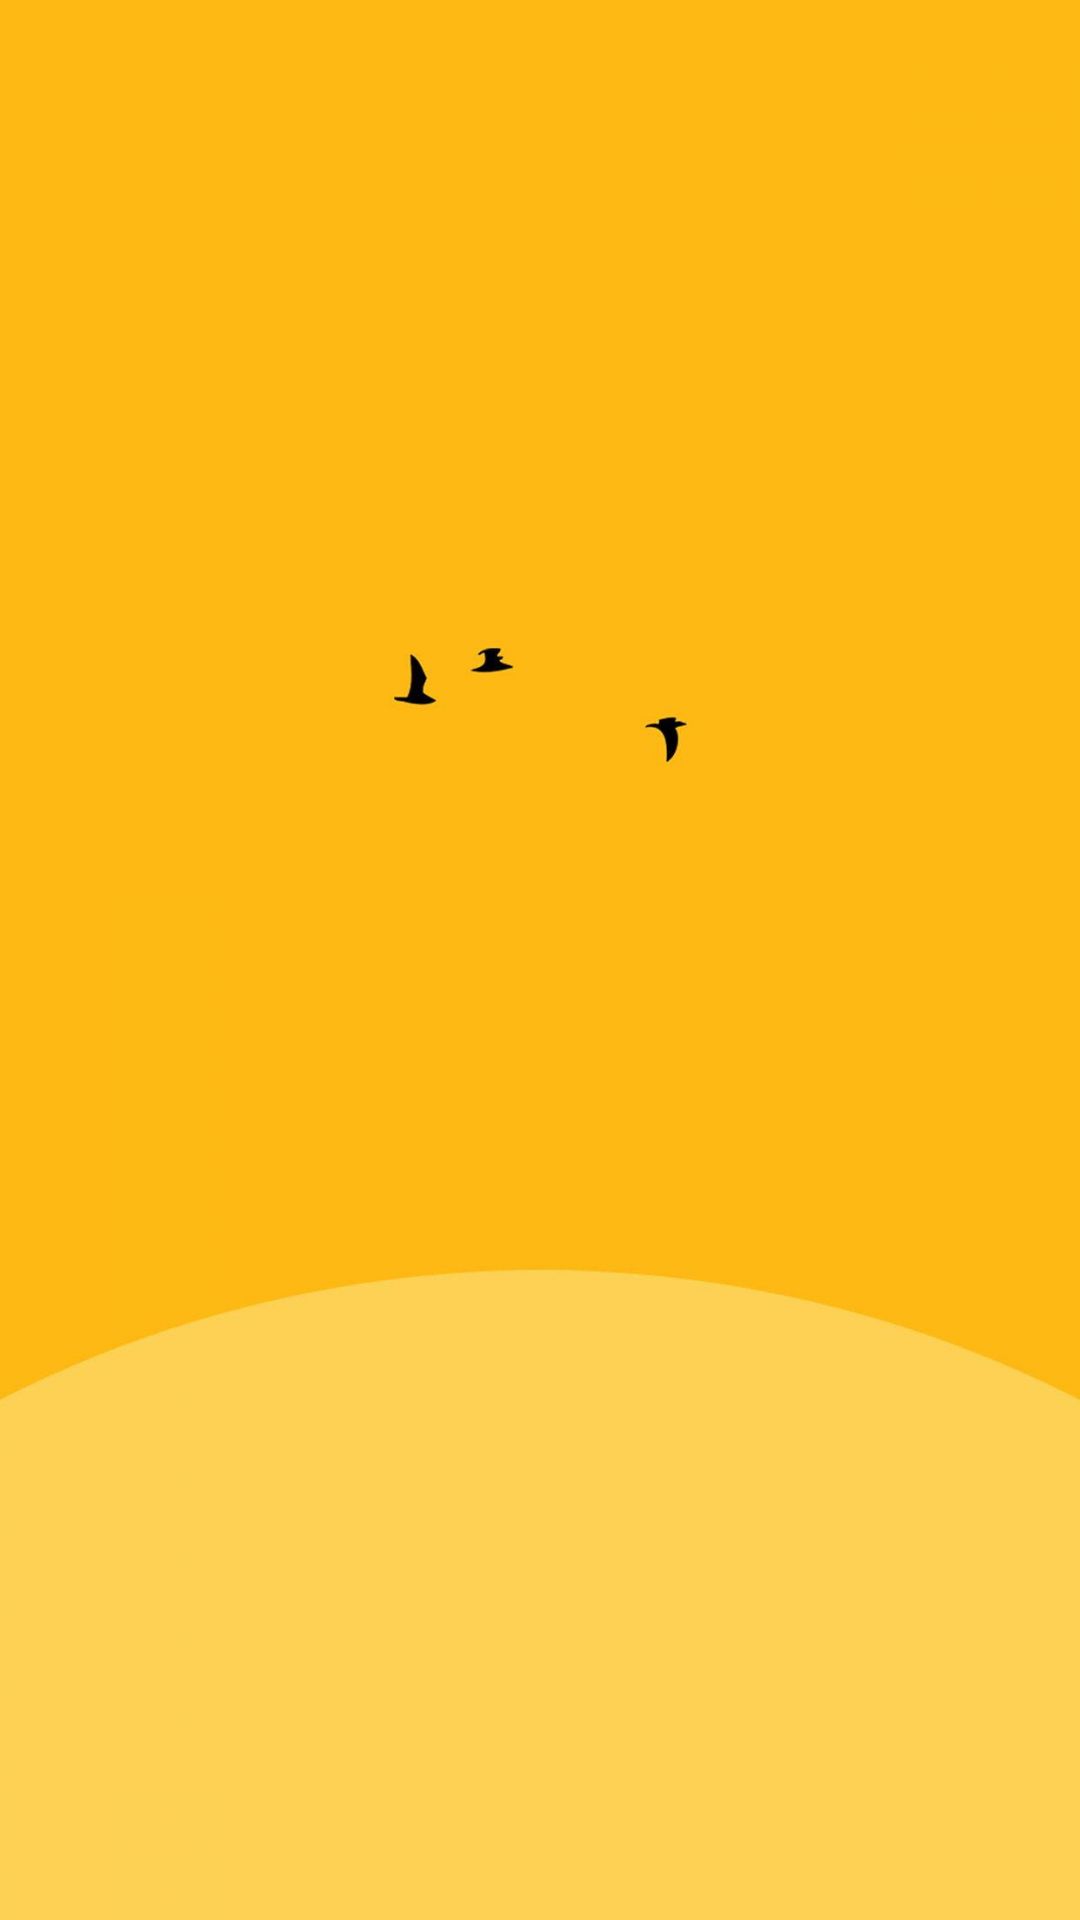 A yellow background with three birds flying in the sky - Yellow